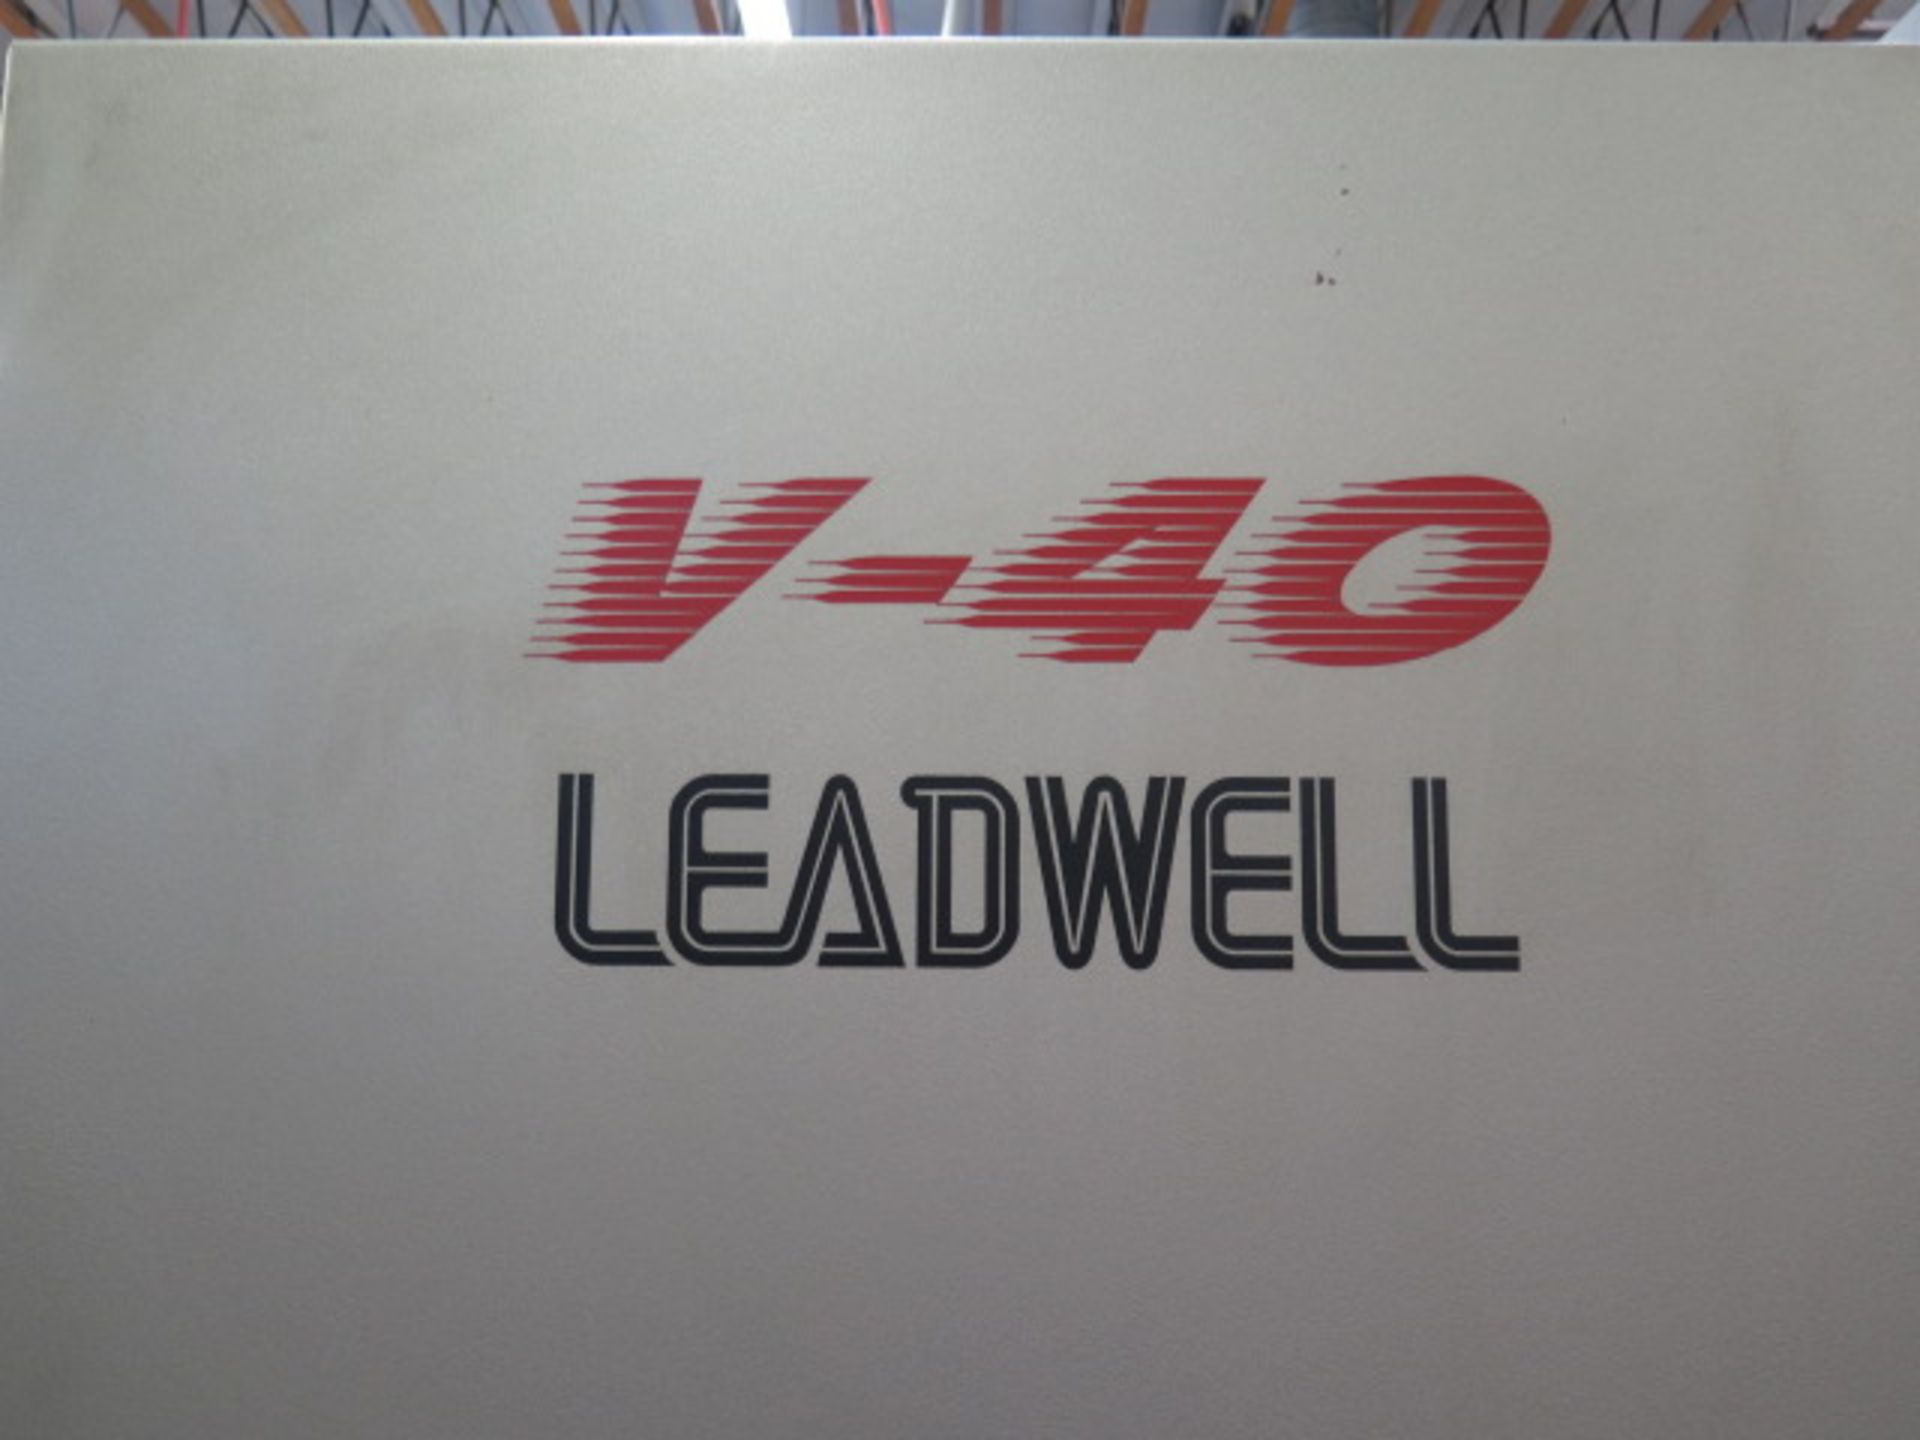 2011 Leadwell V-40 CNC VMC w/ Fanuc Series 0i-MD Controls, Hand Wheel, 24 ATC, SOLD AS IS - Image 11 of 13